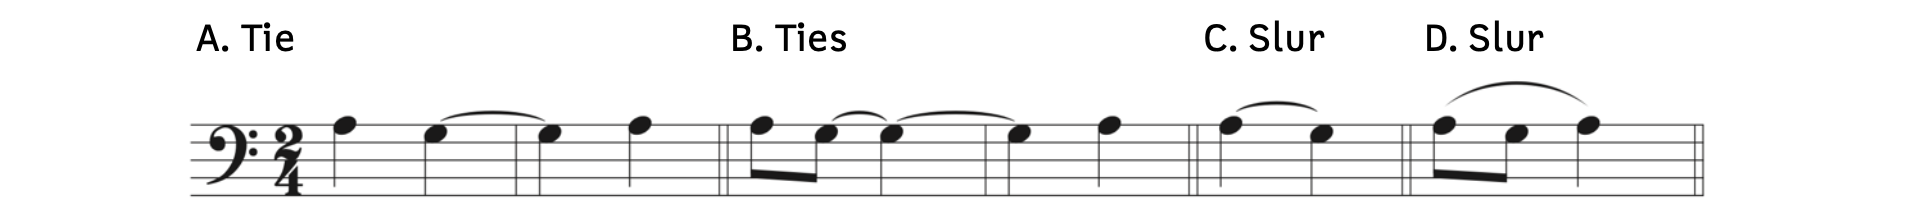 Difference between ties and slurs. Example A shows a tie. Example B shows two ties in a row. Example C shows a slur connecting 2 notes. Example D shows a slur connecting 3 notes.